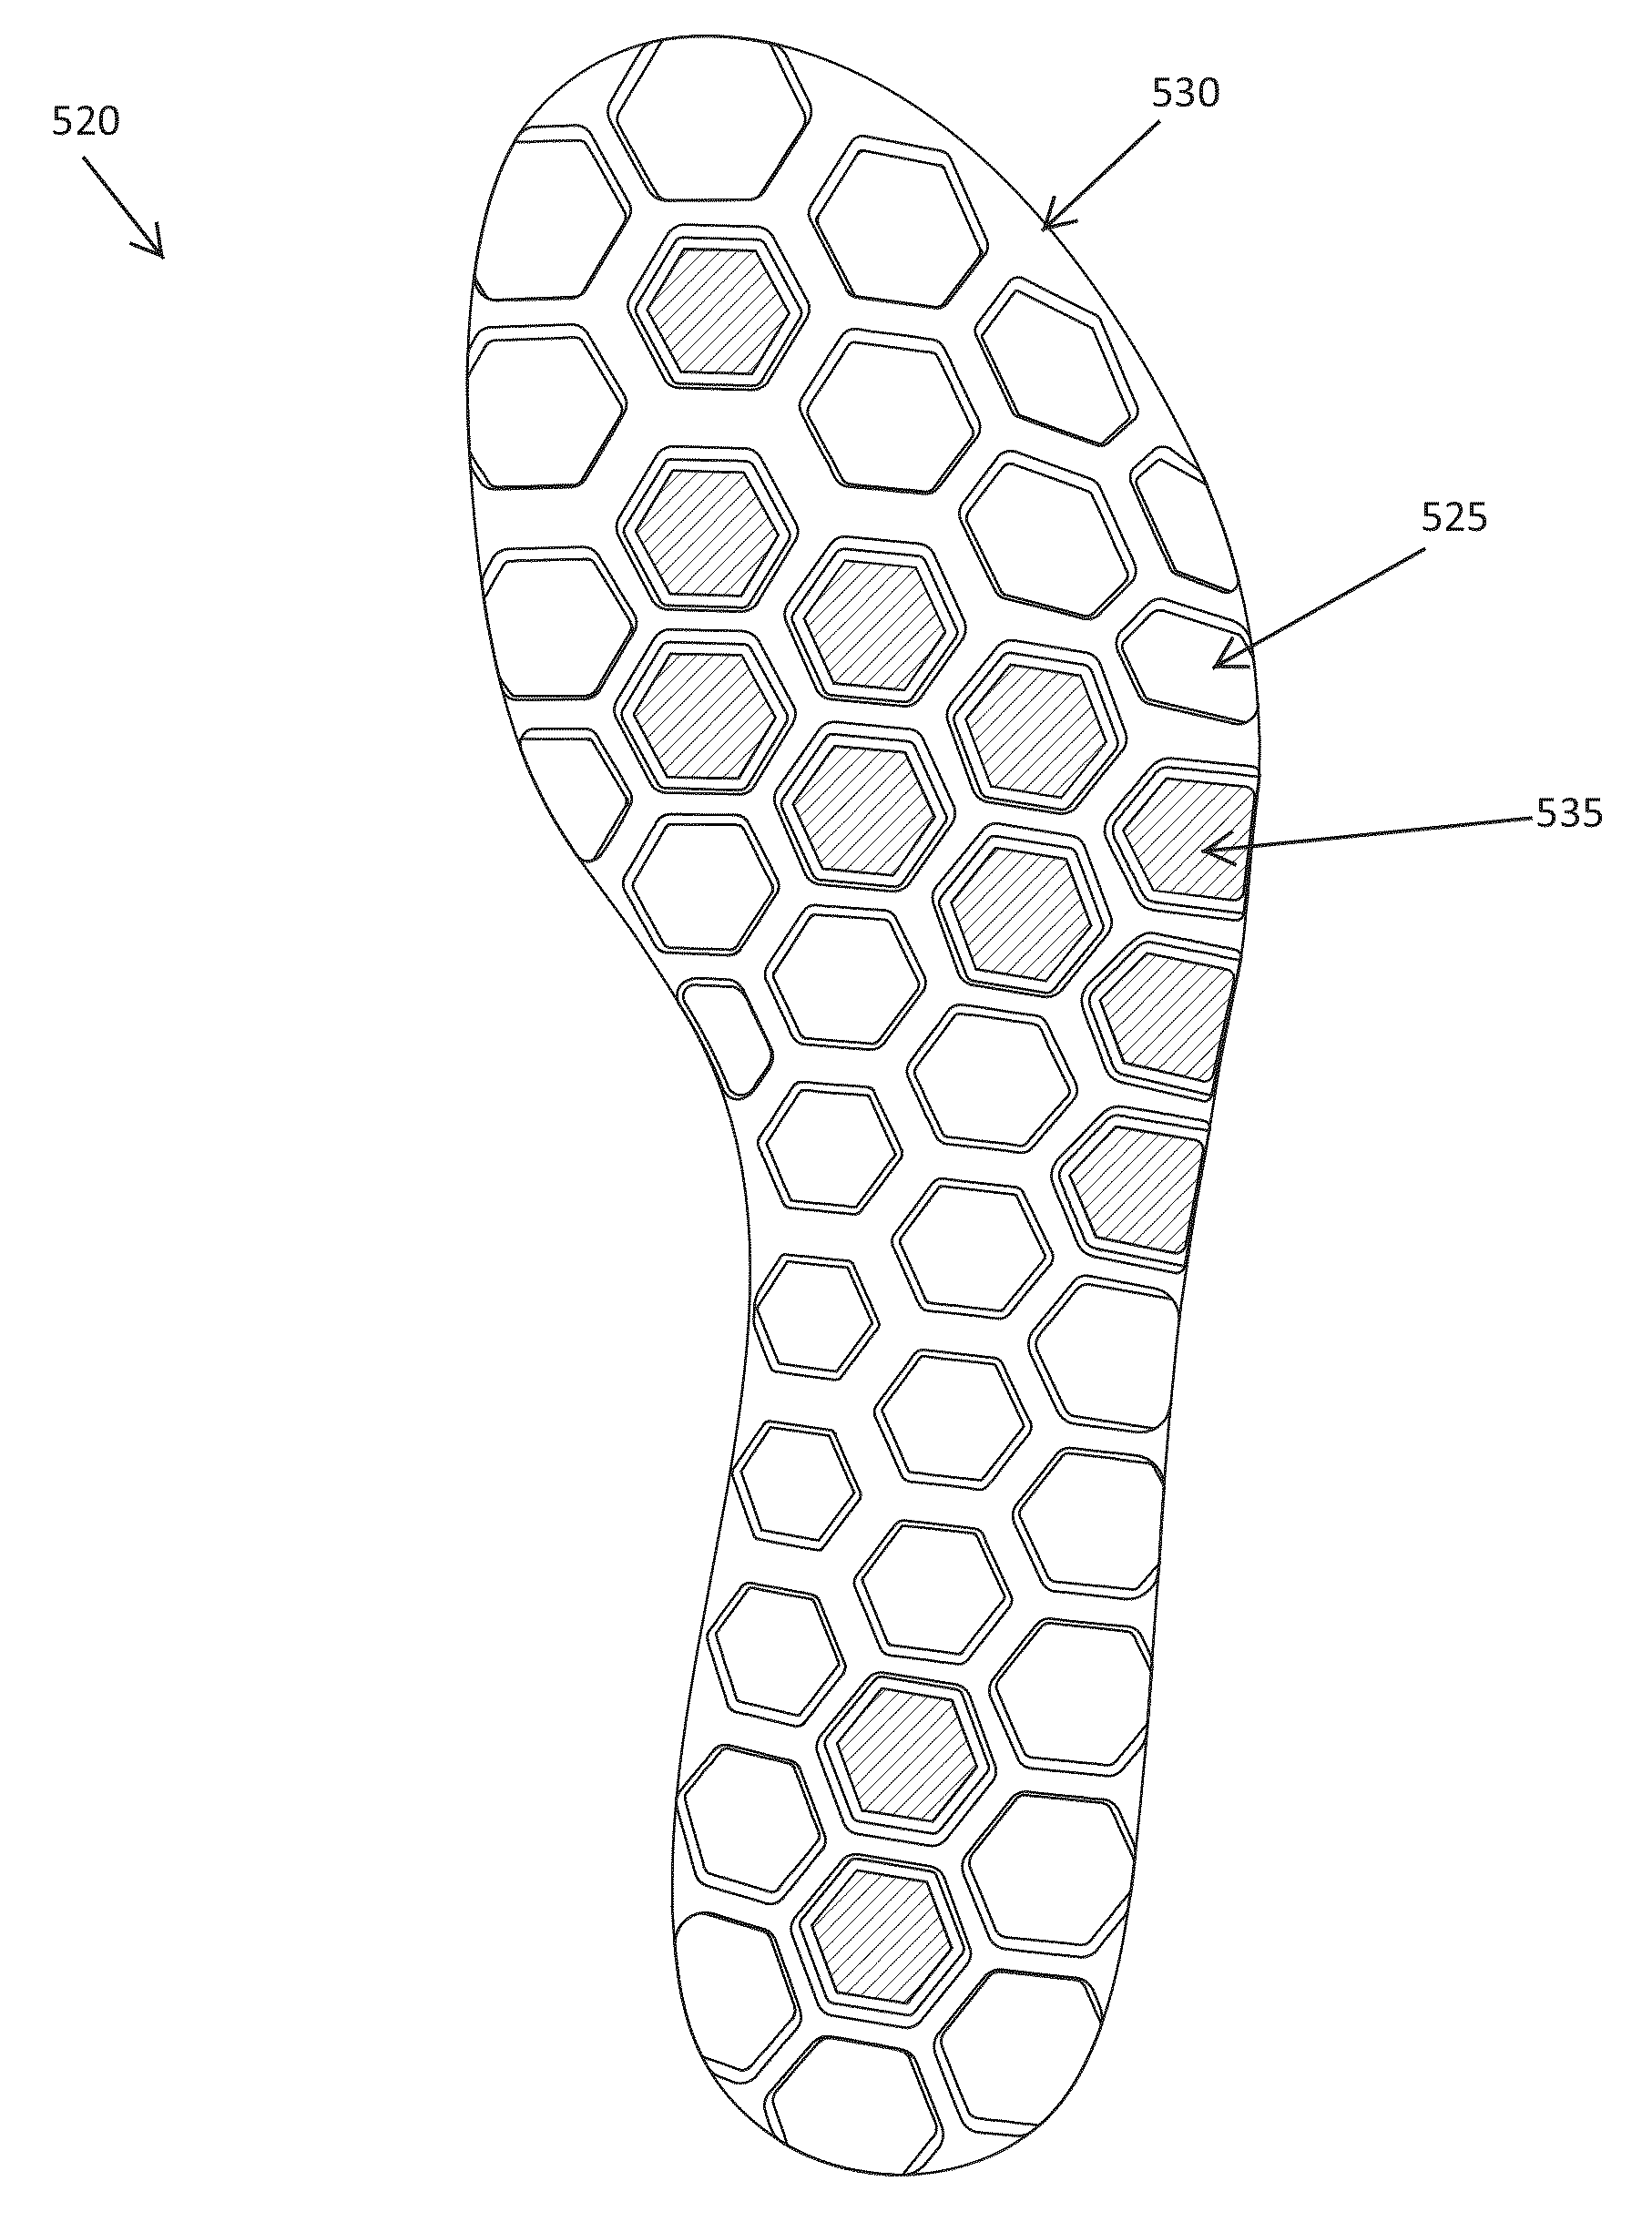 Foamed Parts Having a Fabric Component, and Systems and Methods for Manufacturing Same